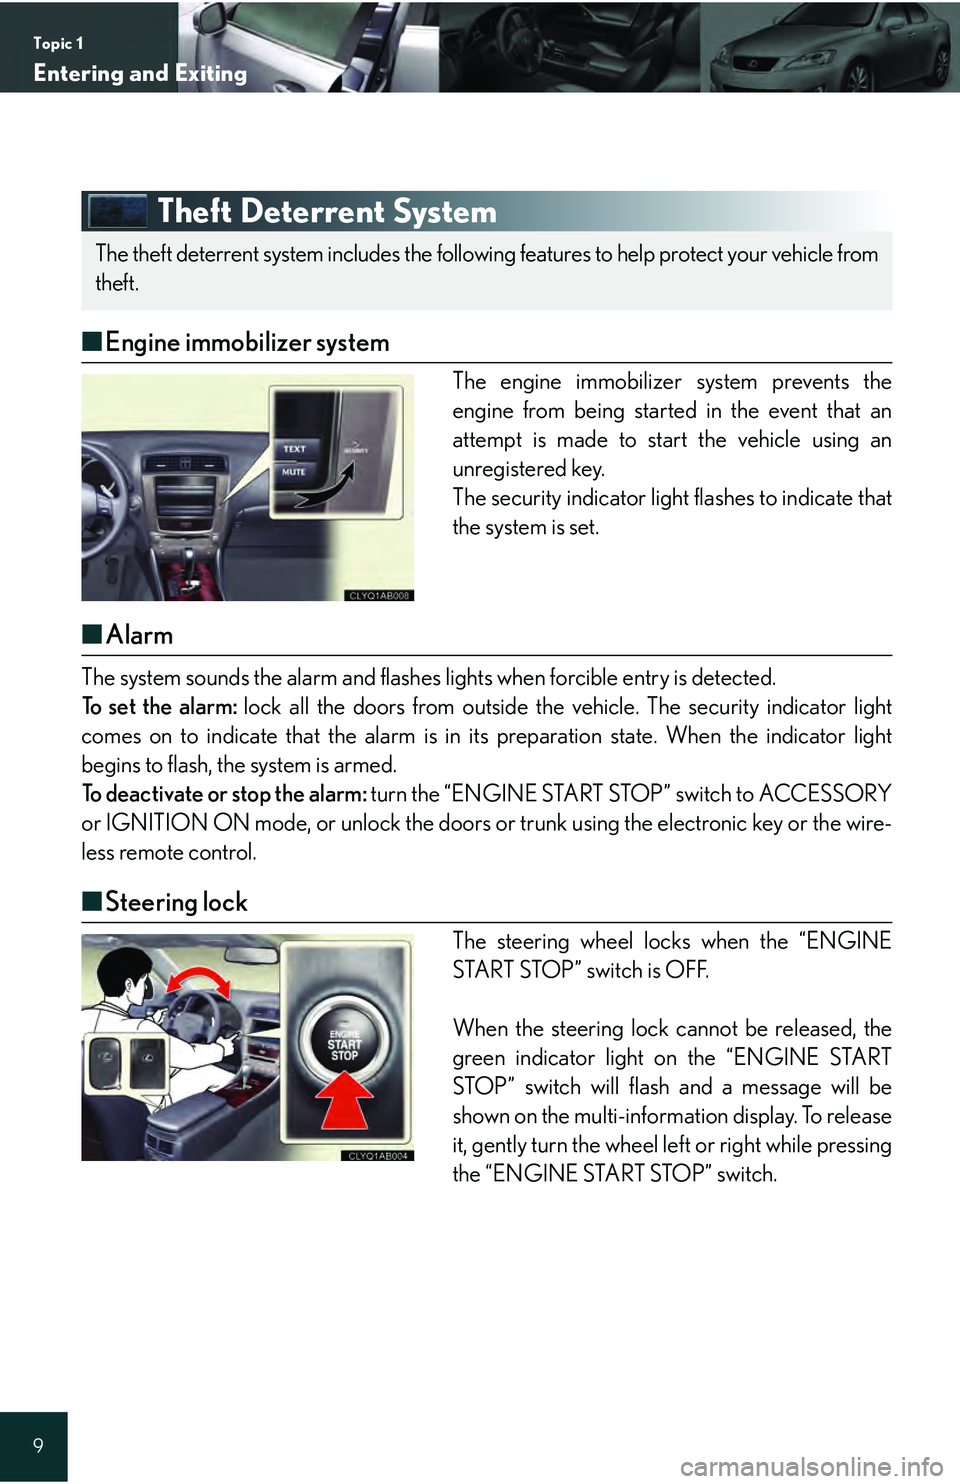 Lexus IS250 2009  Using the audio system / LEXUS 2009 IS350/250 QUICK GUIDE OWNERS MANUAL (OM53689U) Topic 1
Entering and Exiting
9
Theft Deterrent System
■Engine immobilizer system
The engine immobilizer system prevents the
engine from being started in the event that an
attempt is made to start th